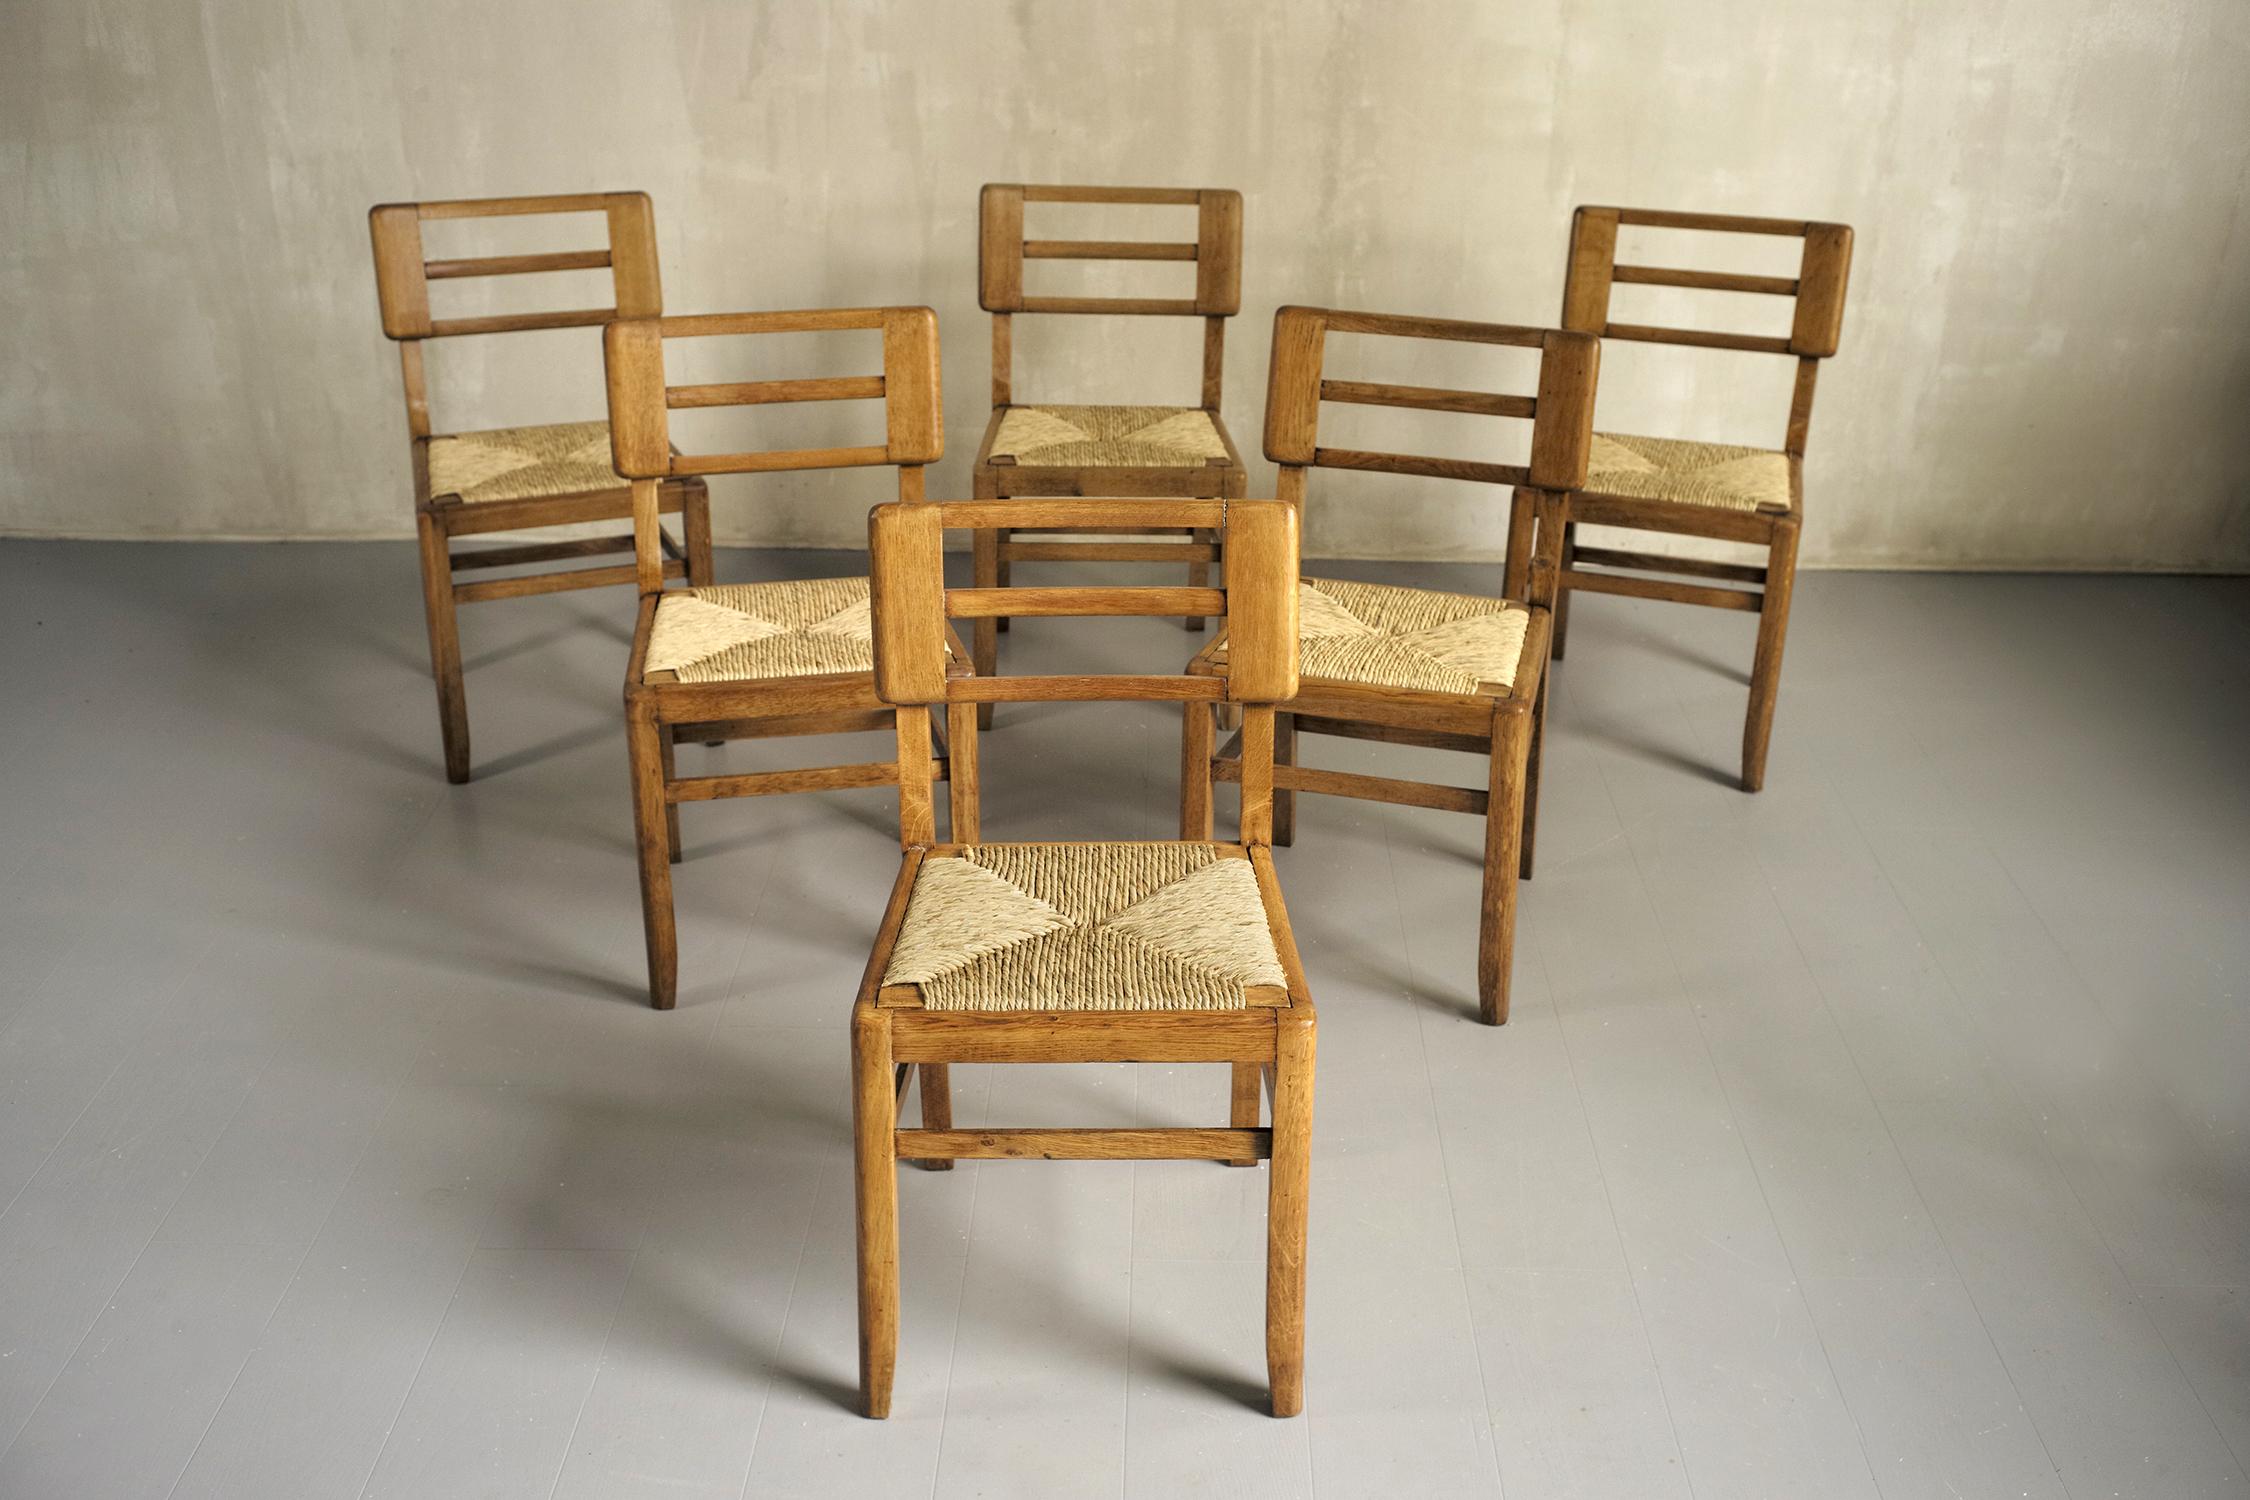 Set of 6 straw chairs by Pierre Cruège, France 1950. Structure in blond oak, seat in natural straw. After having created high quality furniture sets before the Second World War, Pierre Cruège put himself at the service of French Reconstruction